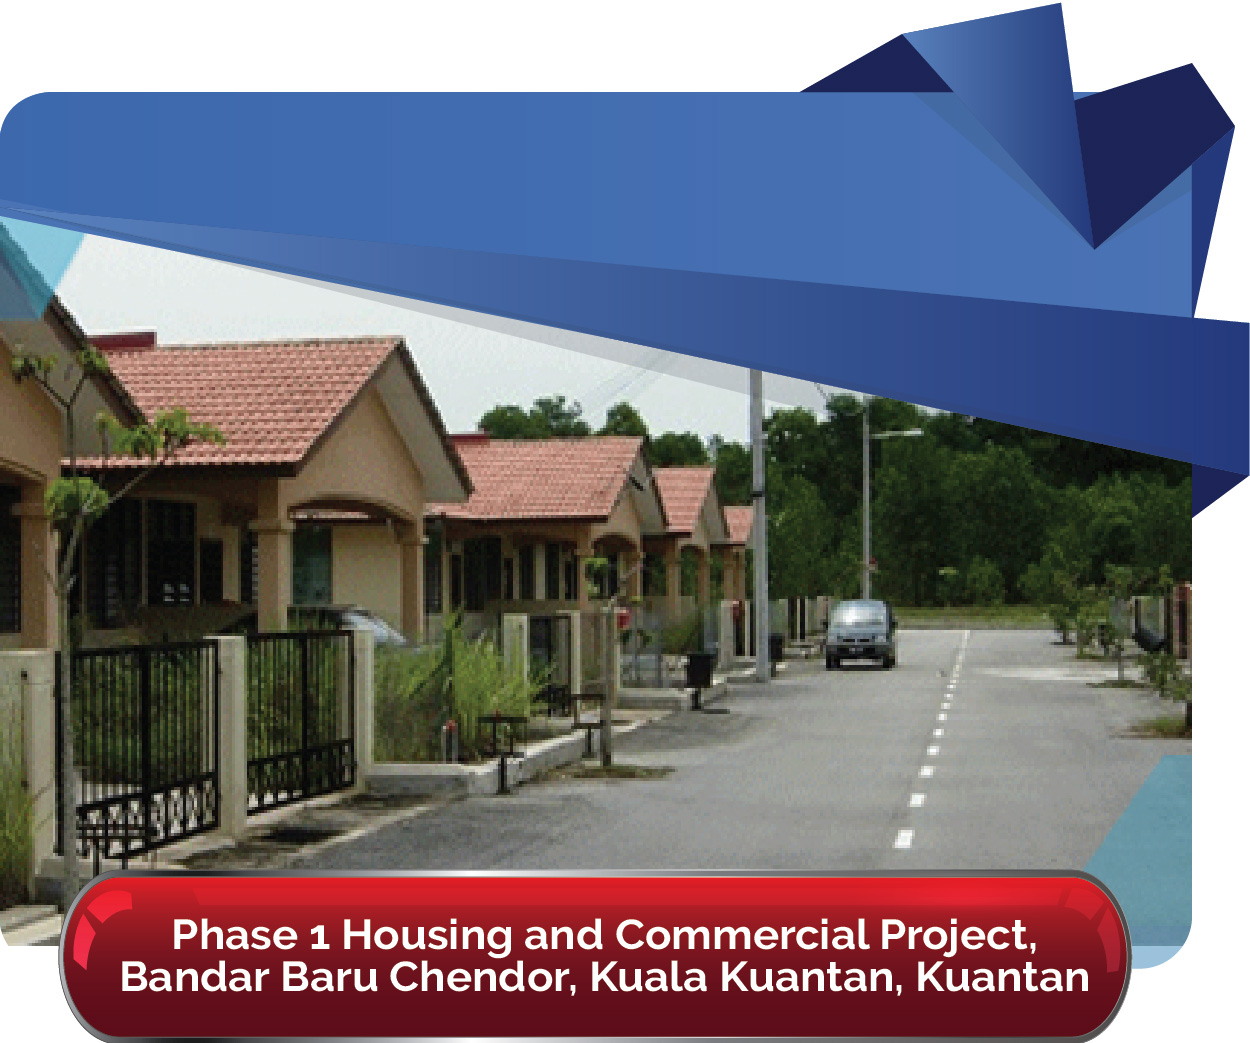 Phase 1 Housing and Commercial Project Bandar Baru Chendor 01